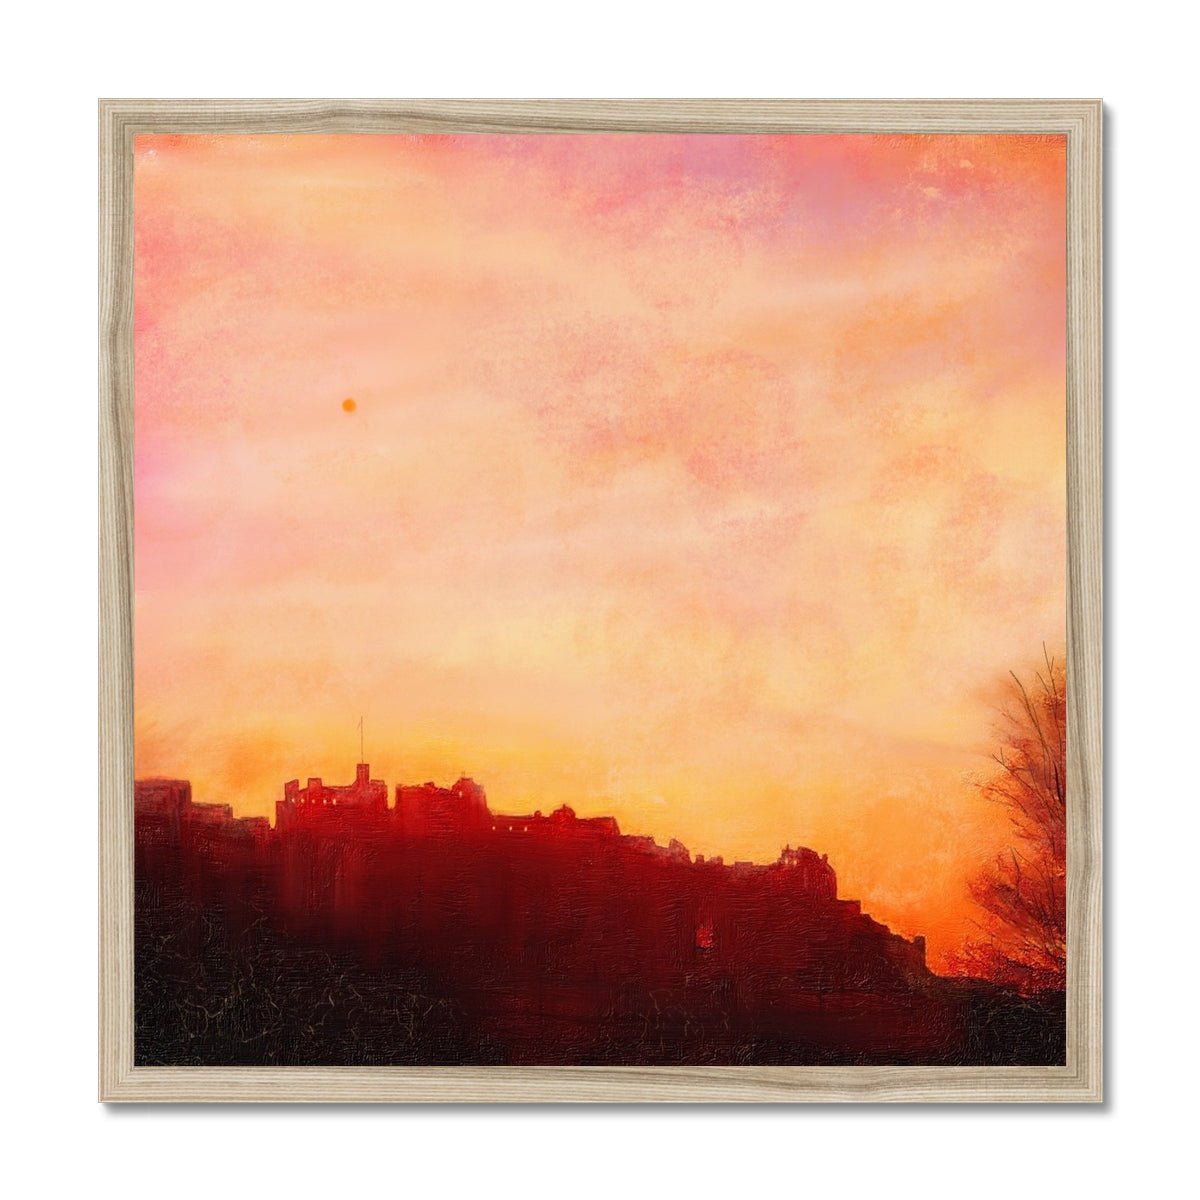 Edinburgh Castle Sunset Painting | Framed Prints From Scotland-Framed Prints-Historic & Iconic Scotland Art Gallery-20"x20"-Natural Frame-Paintings, Prints, Homeware, Art Gifts From Scotland By Scottish Artist Kevin Hunter